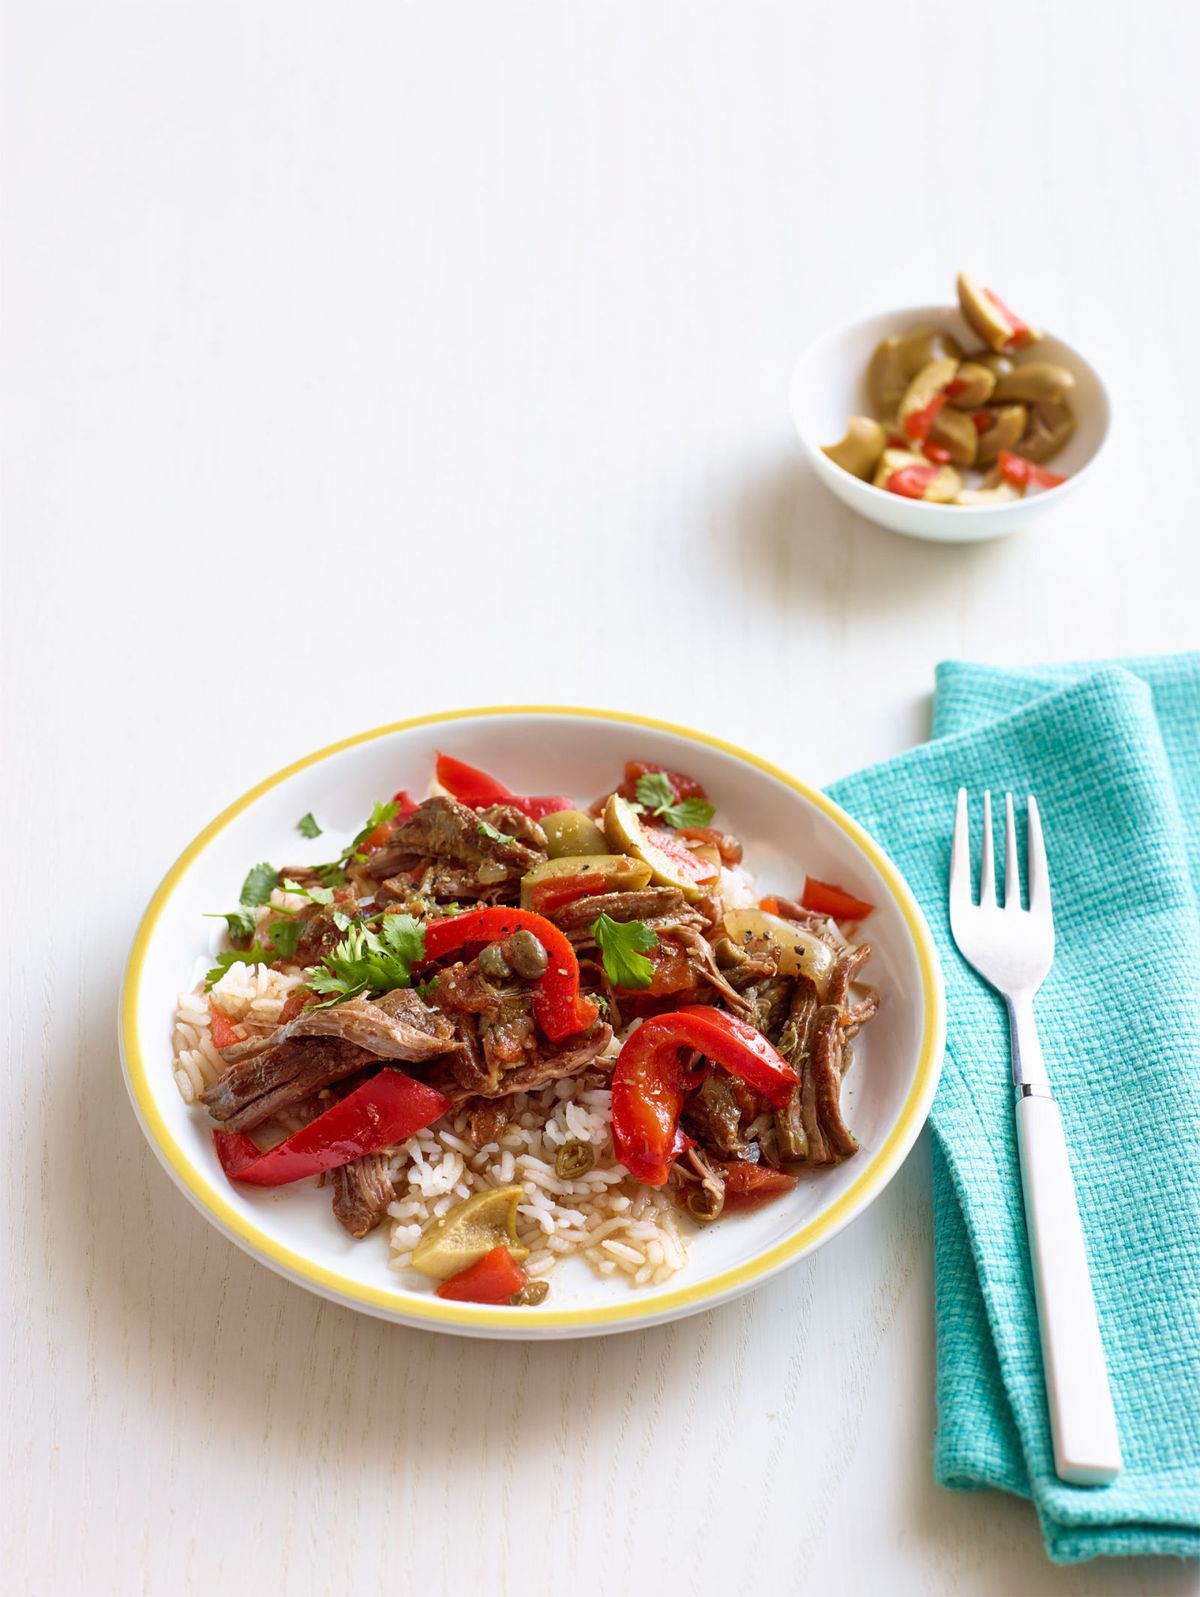 cuban style braised steak and peppers